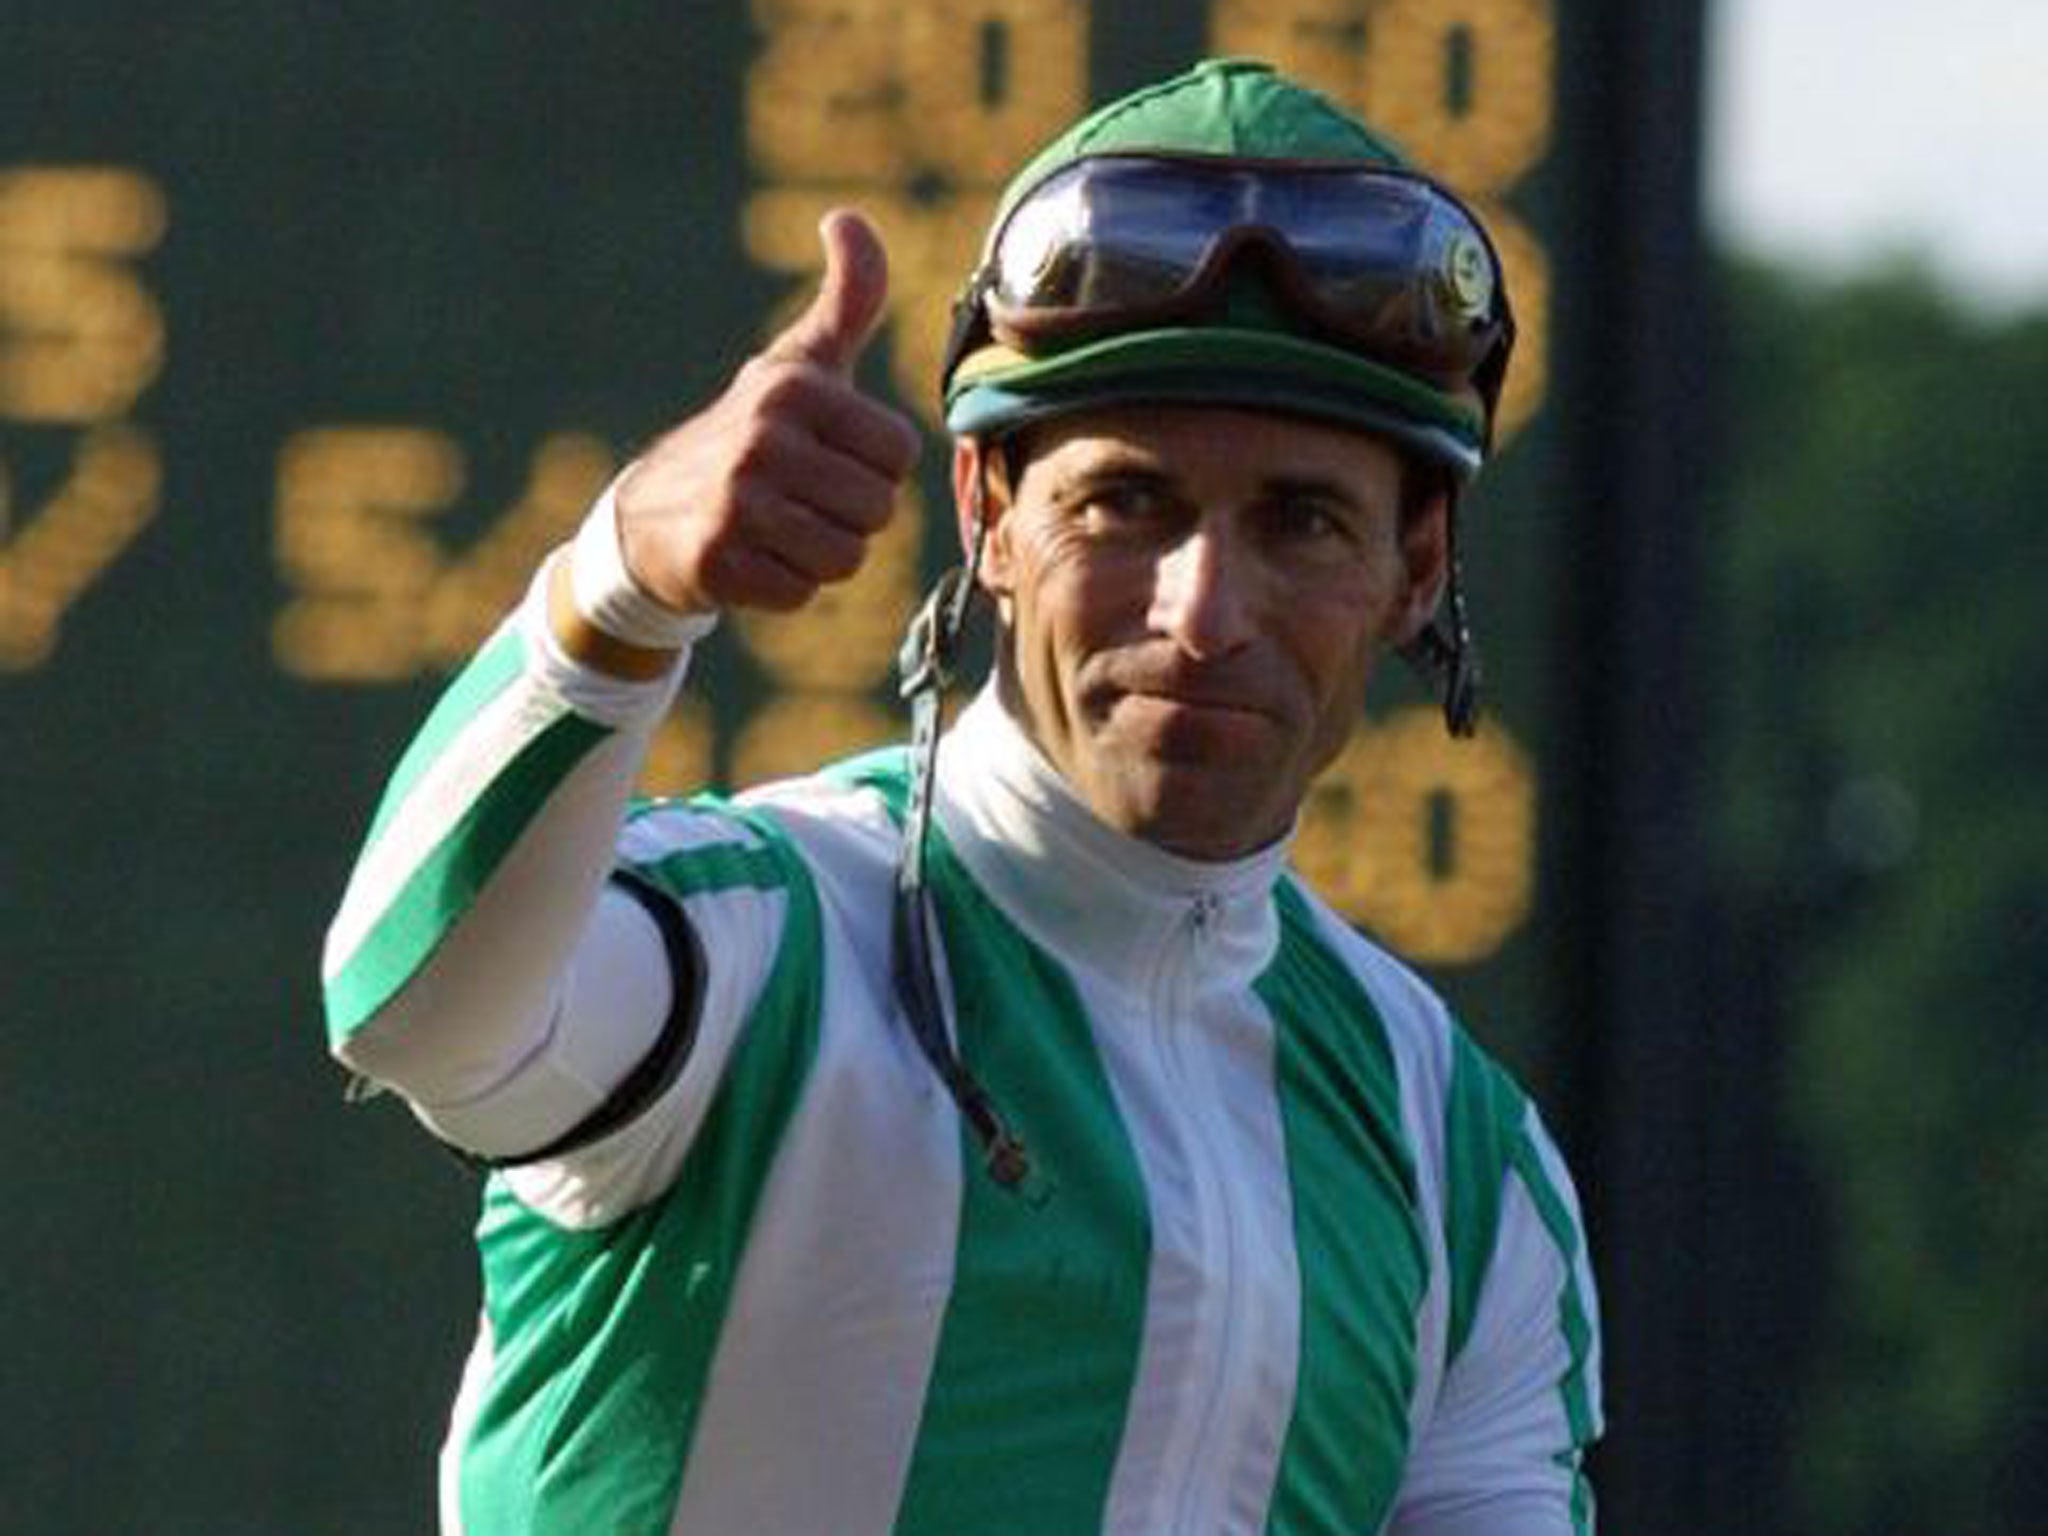 US jockey Gary Stevens, pictured here back in 2001, is set to to race again at the age of 49